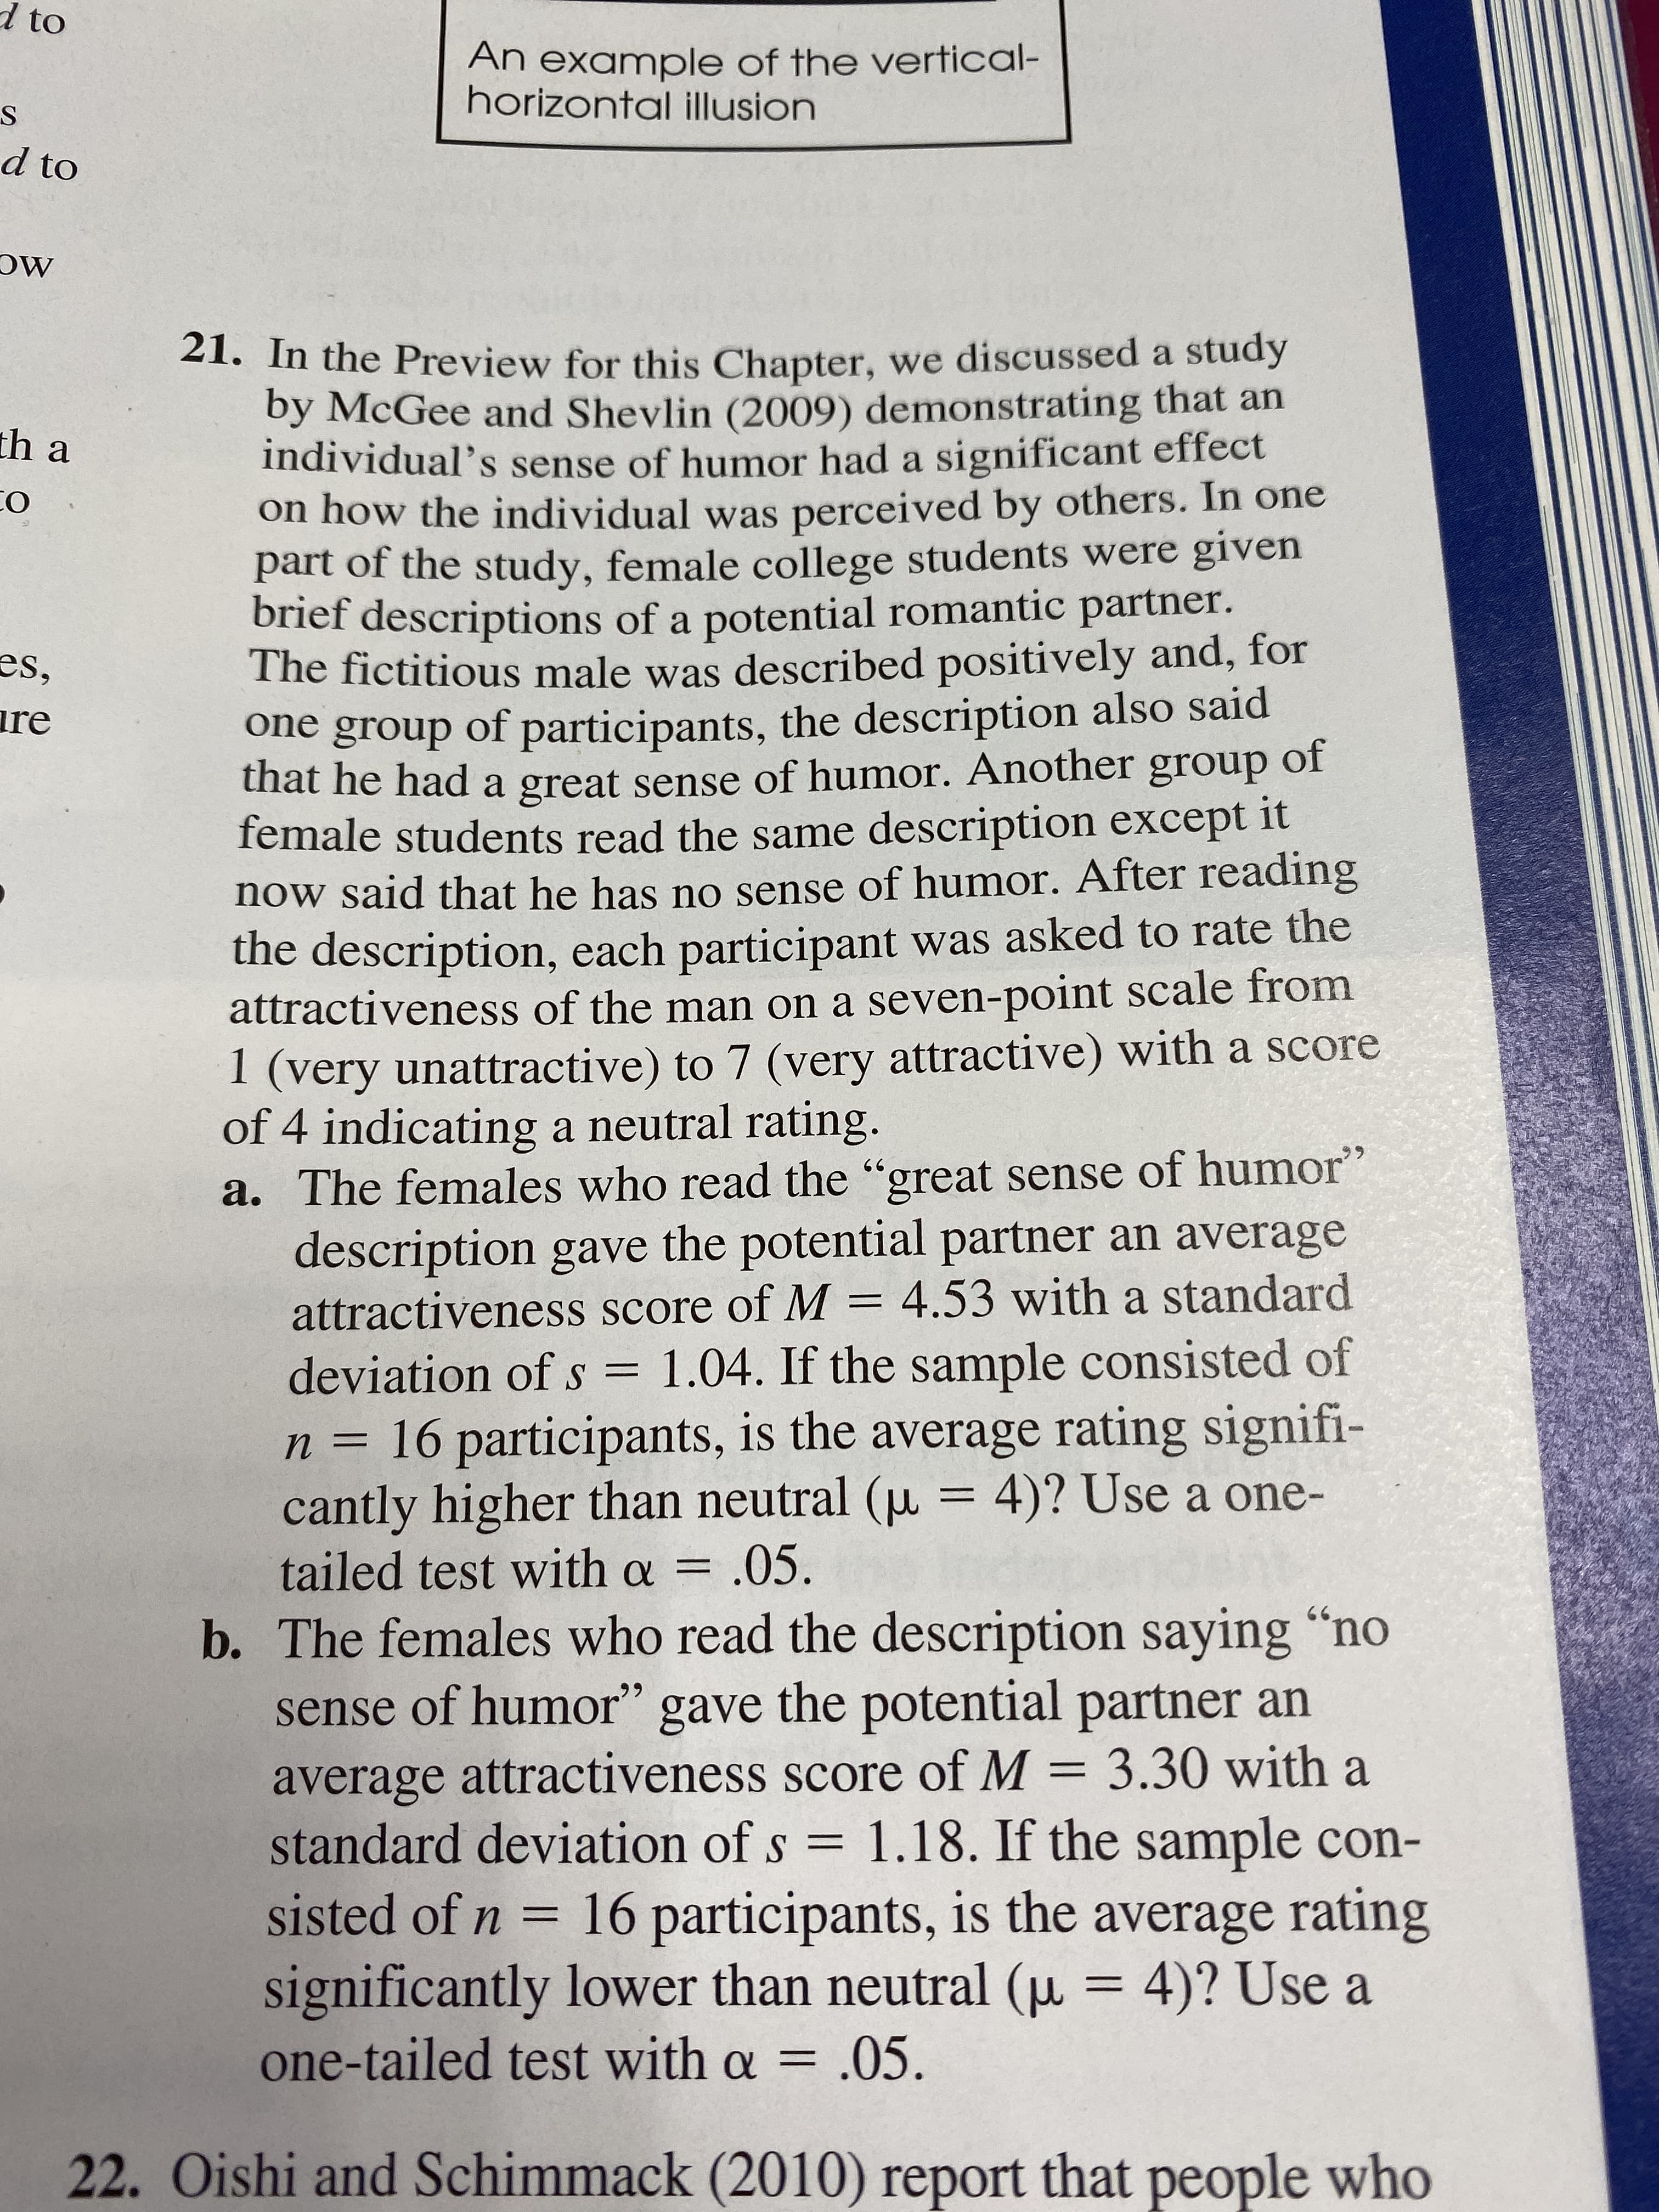 to
An example of the vertical-
horizontal illusion
d to
21. In the Preview for this Chapter, we discussed a study
by McGee and Shevlin (2009) demonstrating that an
individual's sense of humor had a significant effect
on how the individual was perceived by others. In one
part of the study, female college students were given
brief descriptions of a potential romantic partner.
The fictitious male was described positively and, for
one group of participants, the description also said
that he had a great sense of humor. Another group
female students read the same description except it
now said that he has no sense of humor. After reading
the description, each participant was asked to rate the
attractiveness of the man on a seven-point scale from
1 (very unattractive) to 7 (very attractive) with a score
of 4 indicating a neutral rating.
a. The females who read the "great sense of humor"
description gave the potential partner an average
attractiveness score of M 4.53 with a standard
th a
О
es,
re
of
1.04. If the sample consisted of
deviation of s =
16 participants, is the average rating signifi-
cantly higher than neutral (u = 4)? Use a one-
tailed test with a = .05
b. The females who read the description saying "no
sense of humor" gave the potential partner an
average attractiveness score of M 3.30 with a
n=
S=
sisted of n 16 participants, is the average rating
significantly lower than neutral (u 4)? Use a
one-tailed test with a = .05
22. Oishi and Schimmack (2010) report that people who
